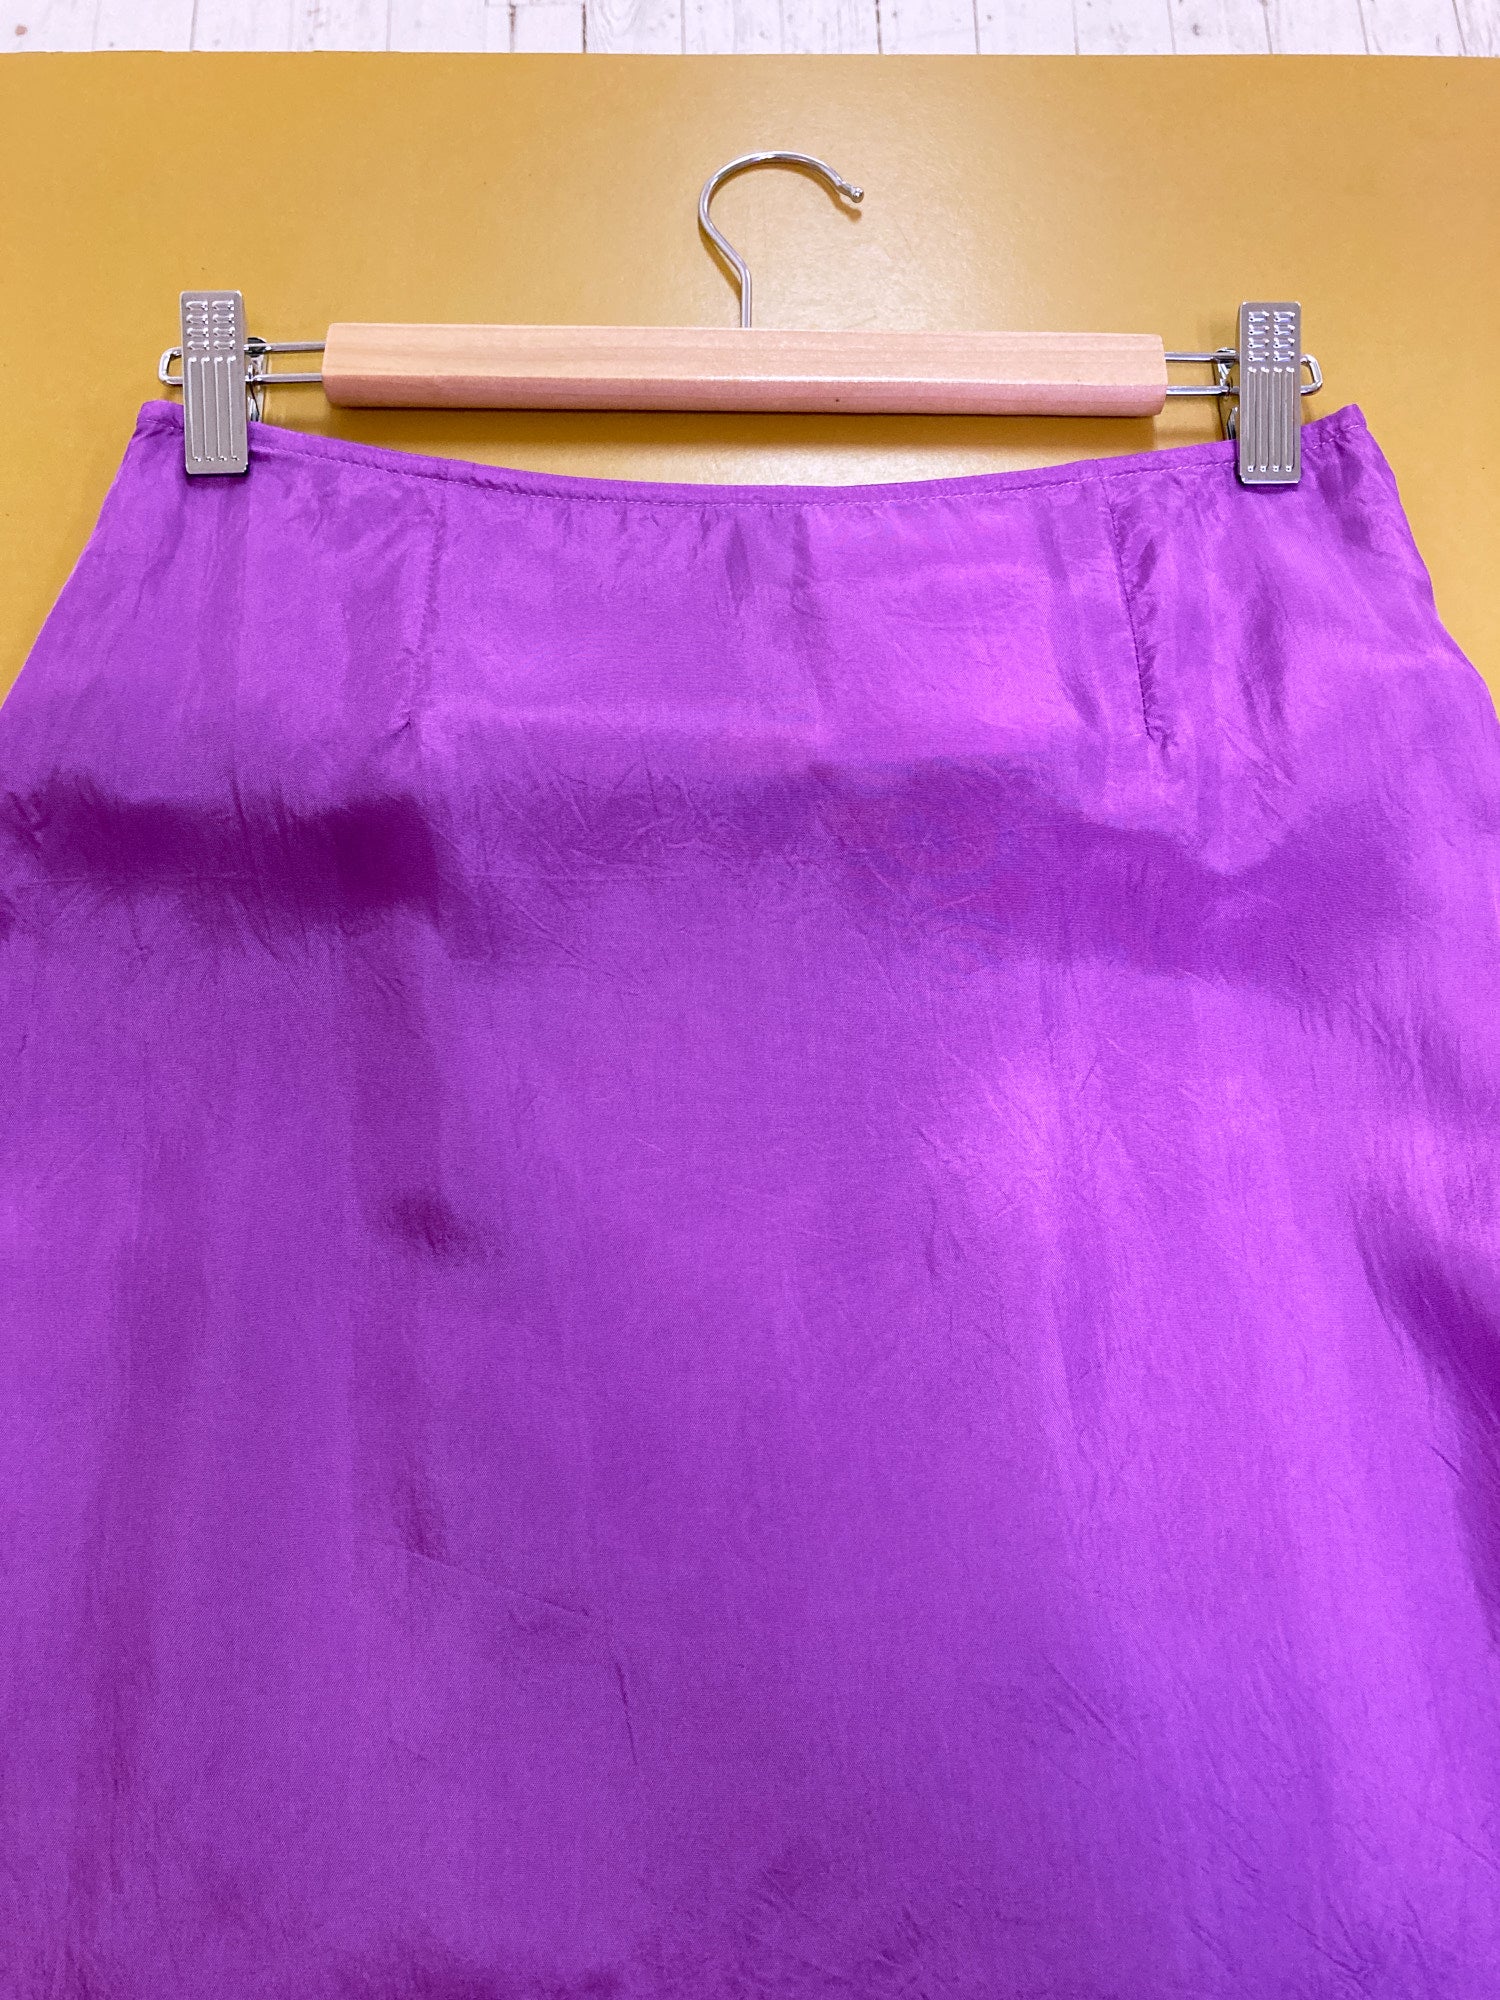 Tricot Comme des Garcons 2003 purple satin flared skirt with raw hem - S